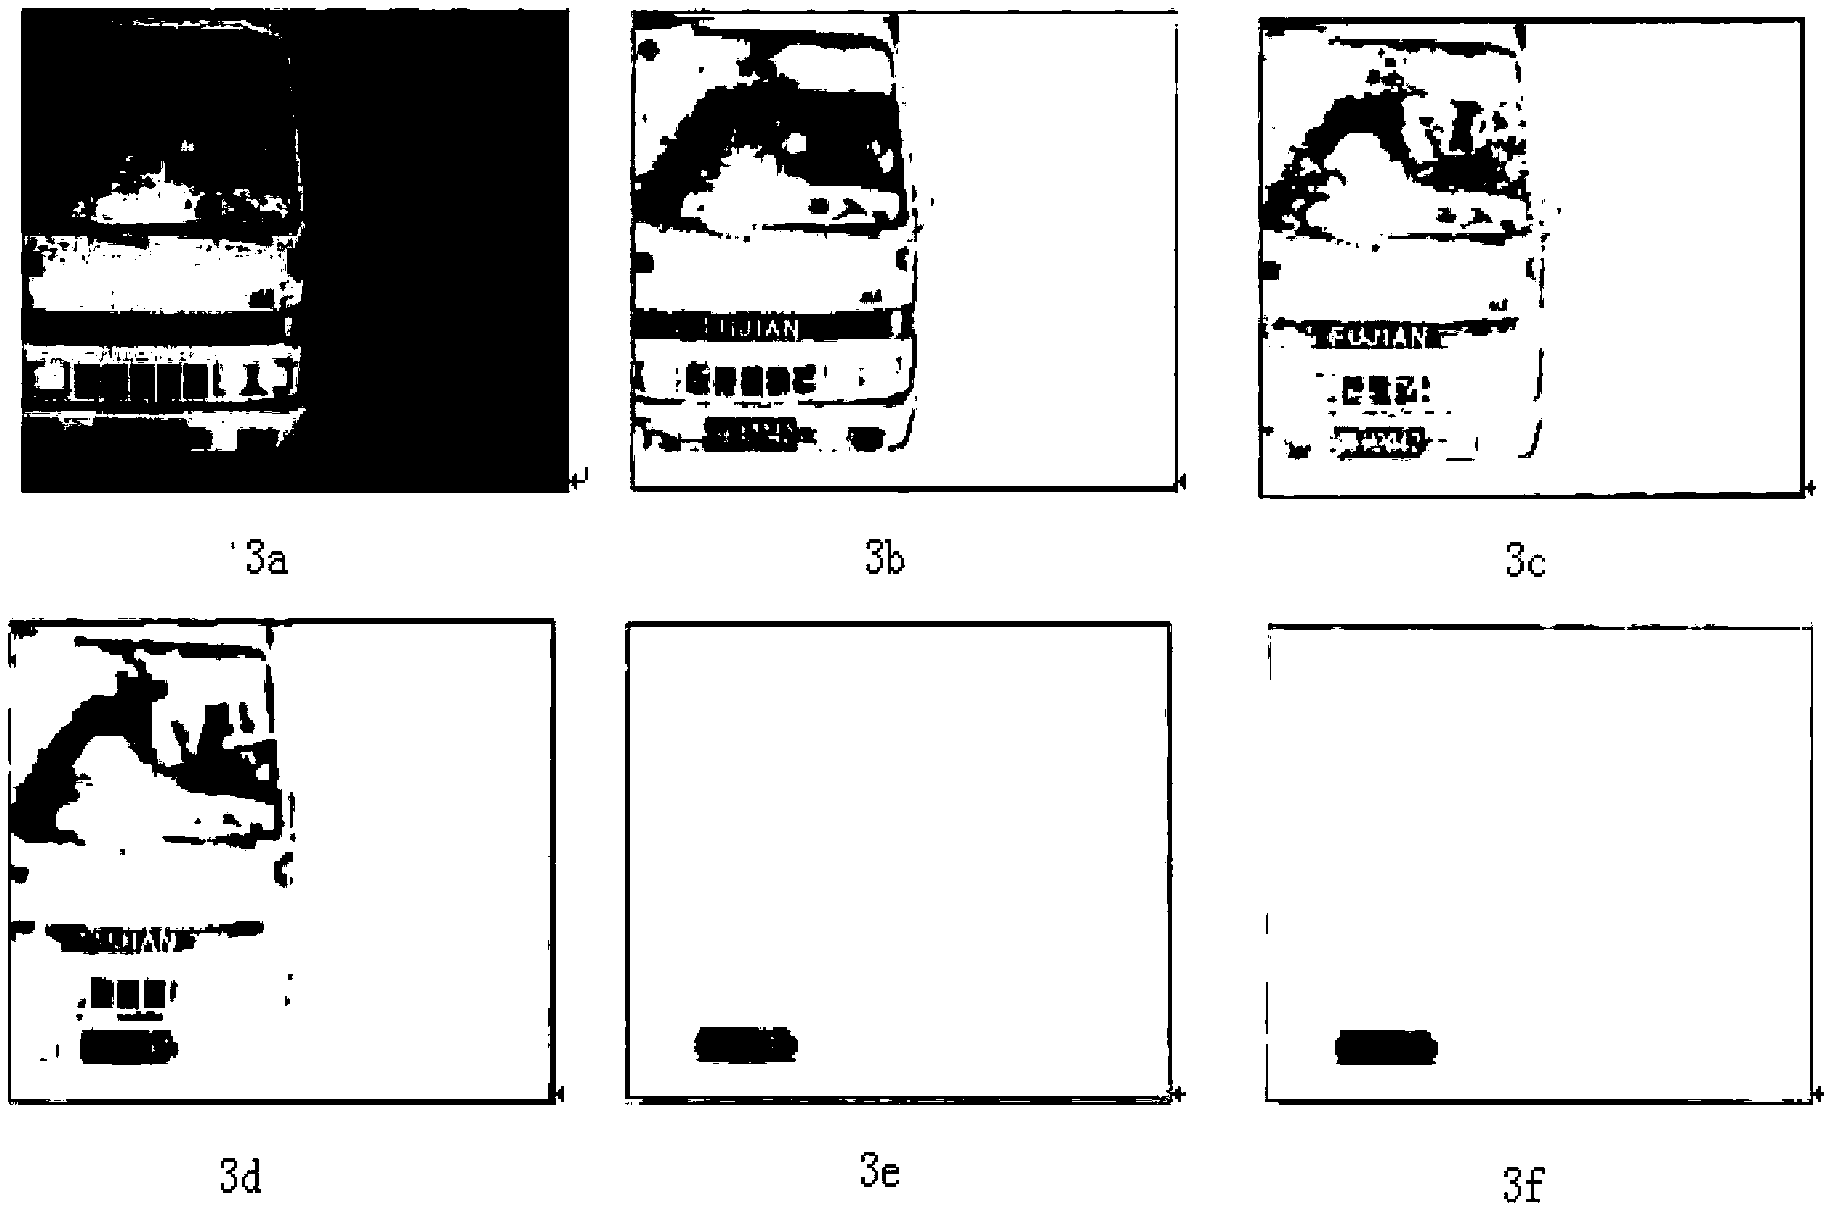 License plate locating method based on colorful binary image